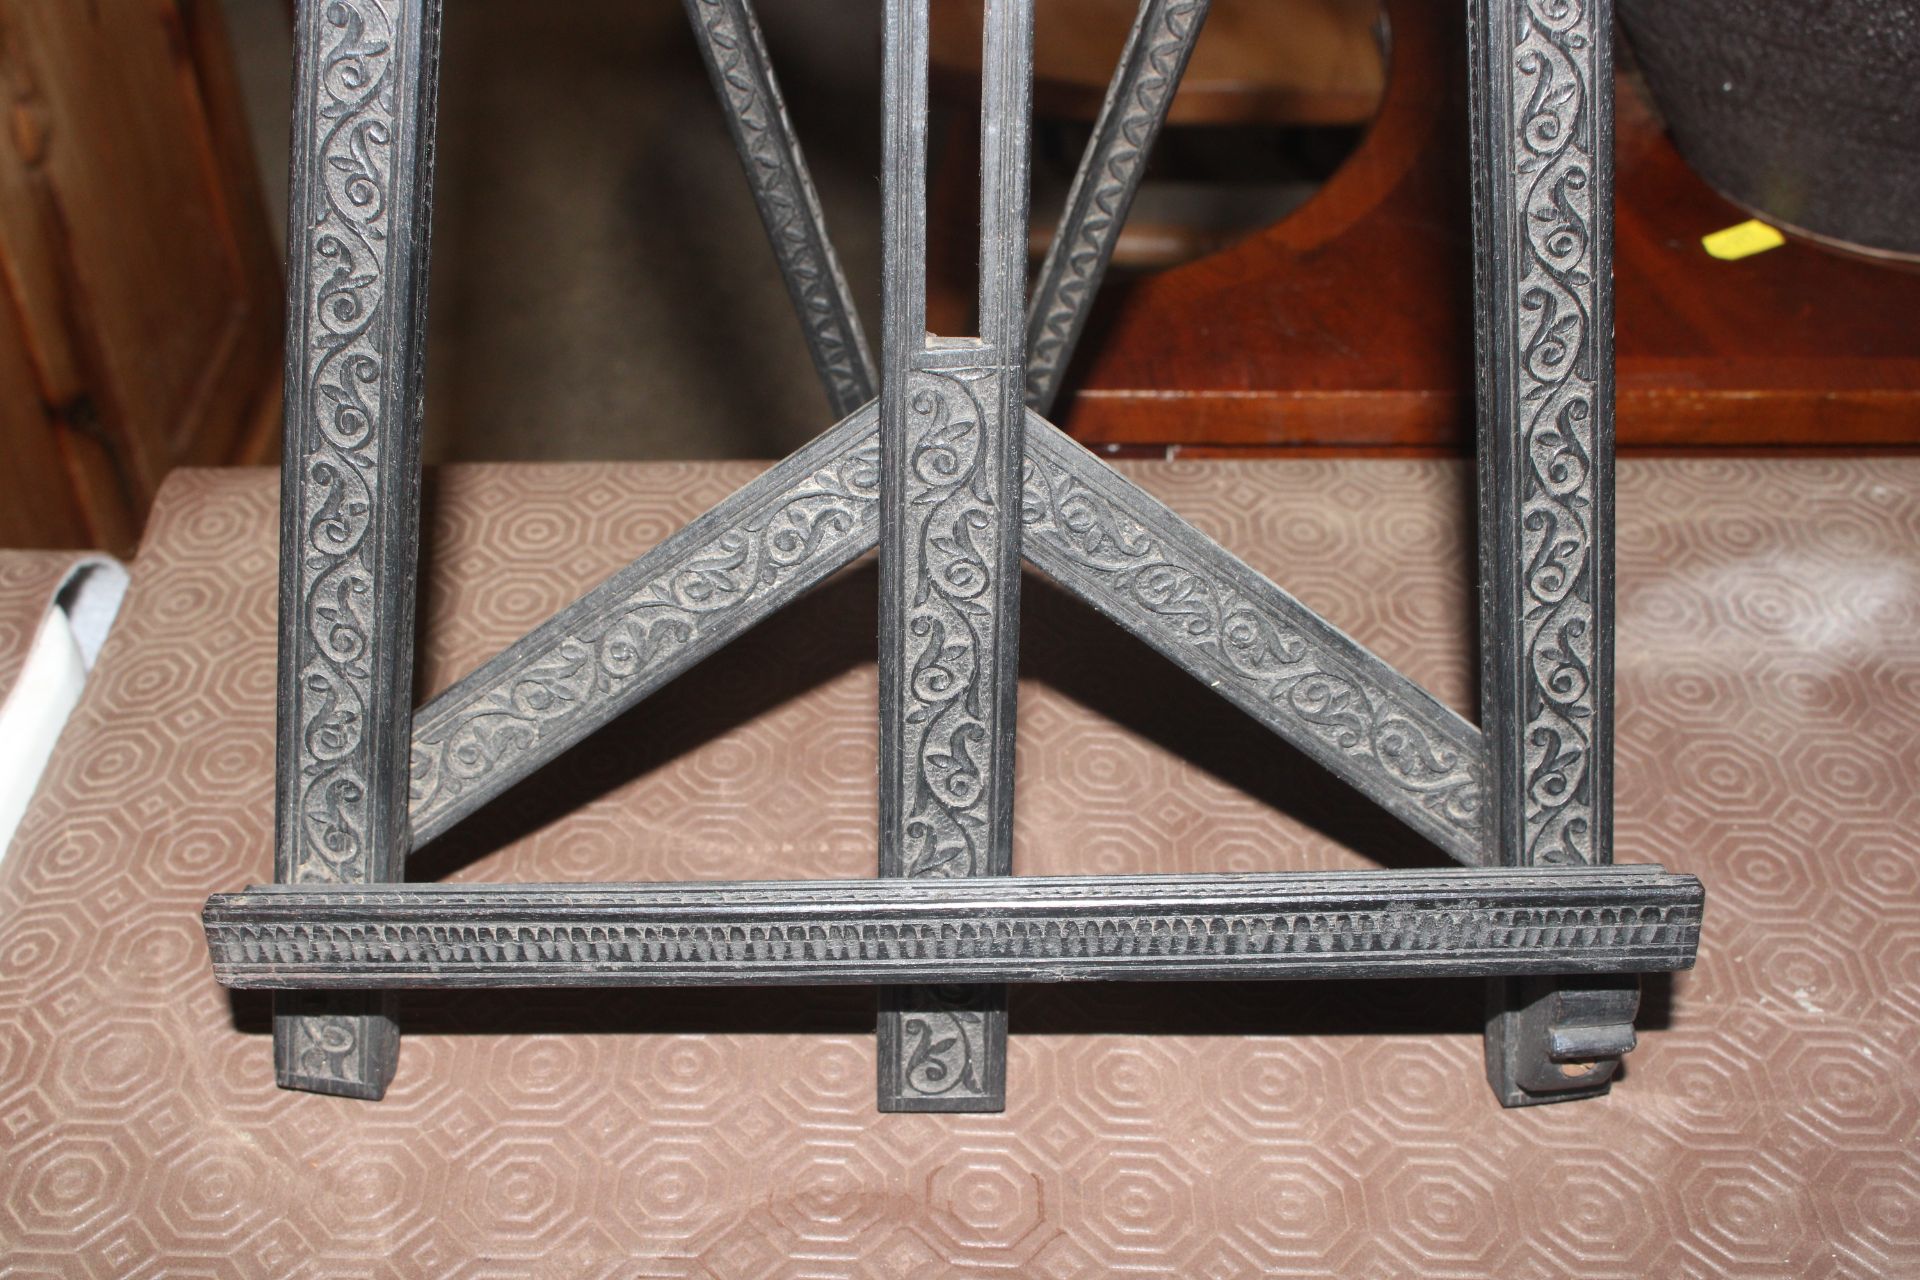 Two carved ebony music stands - Image 5 of 7